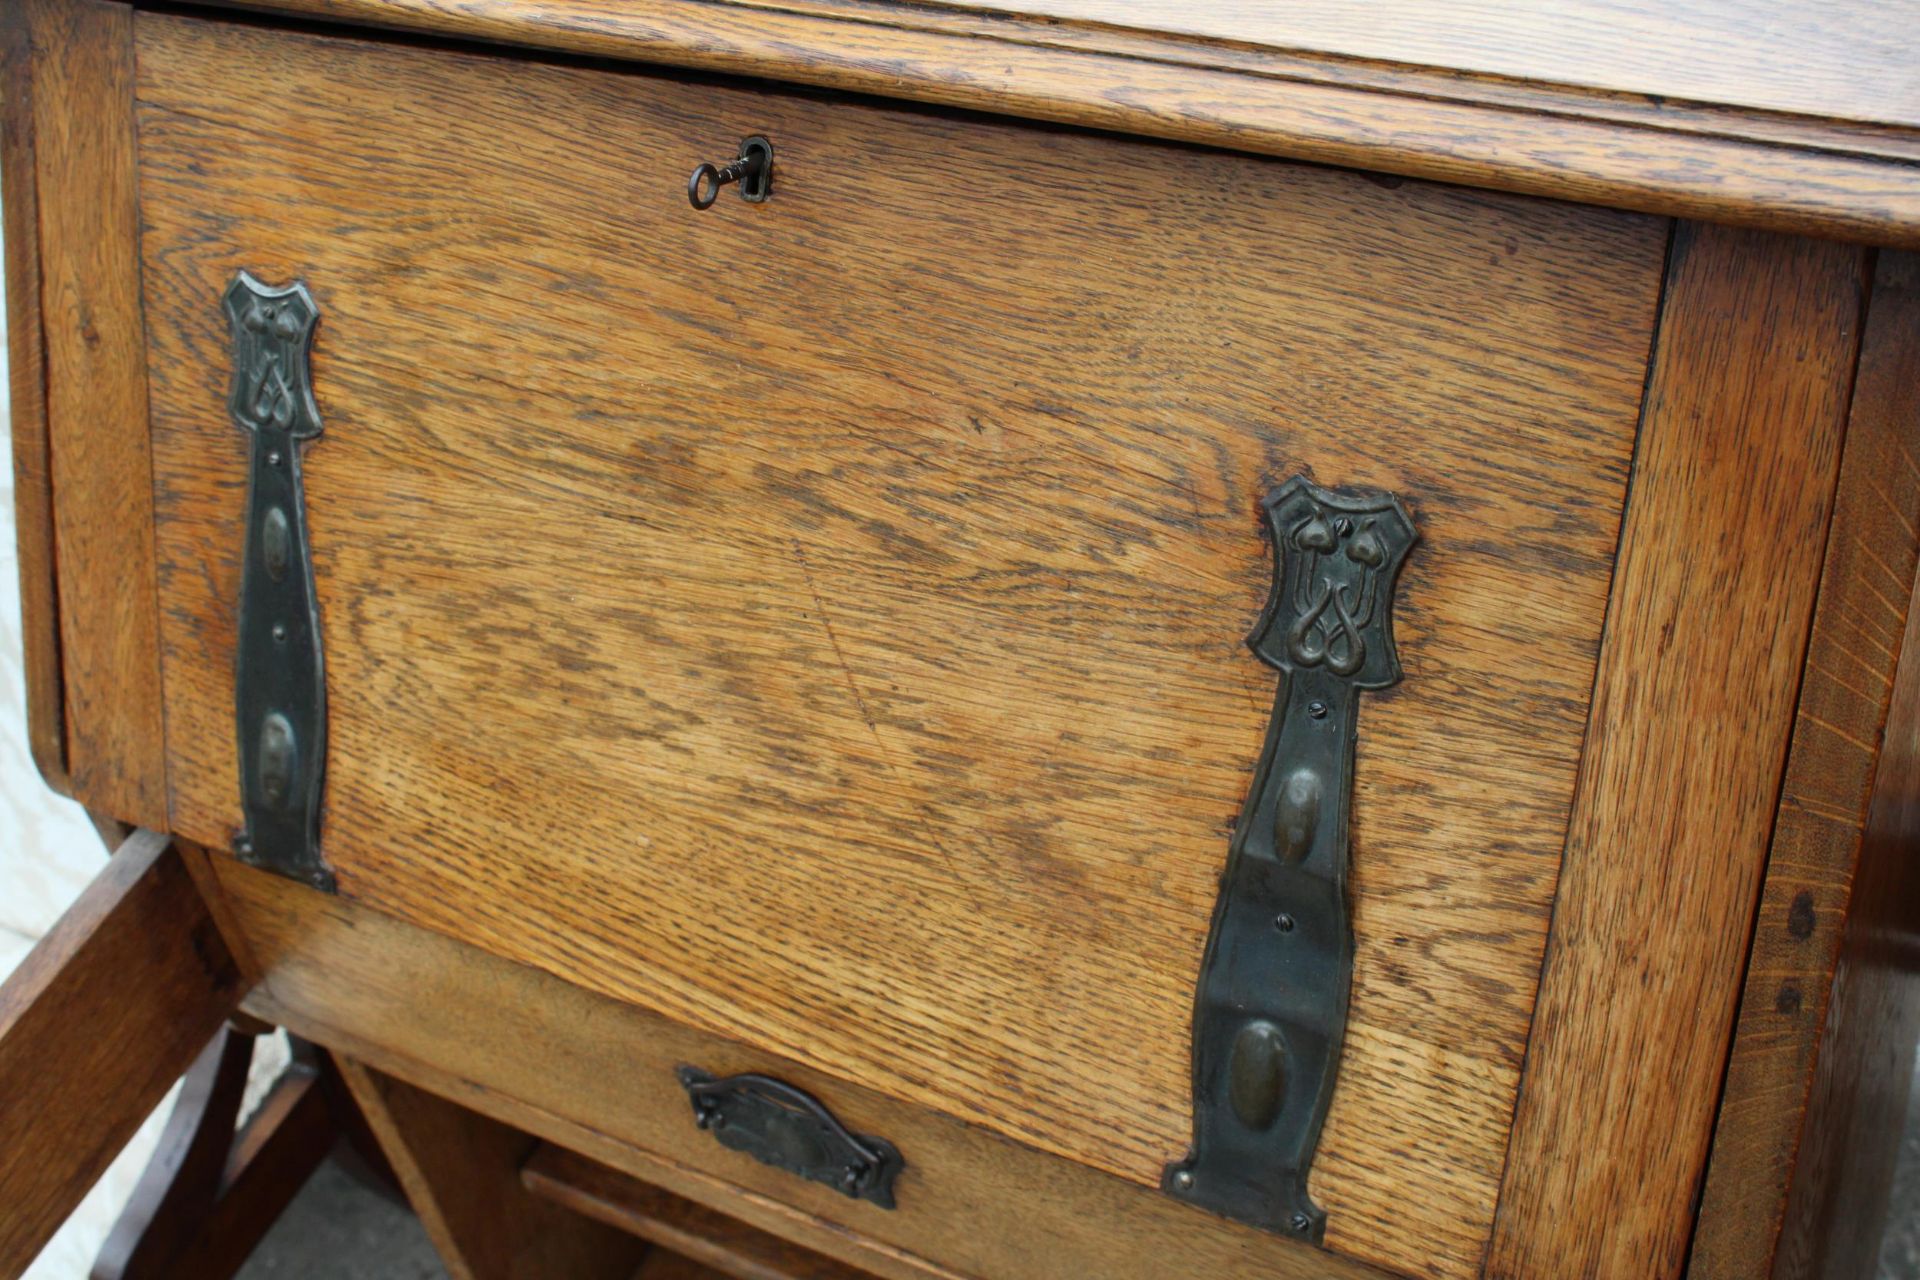 AN OAK ARTS AND CRAFTS BUREAU WITH GALLERY BACK AND OPEN BASE, 30" WIDE - Image 3 of 4